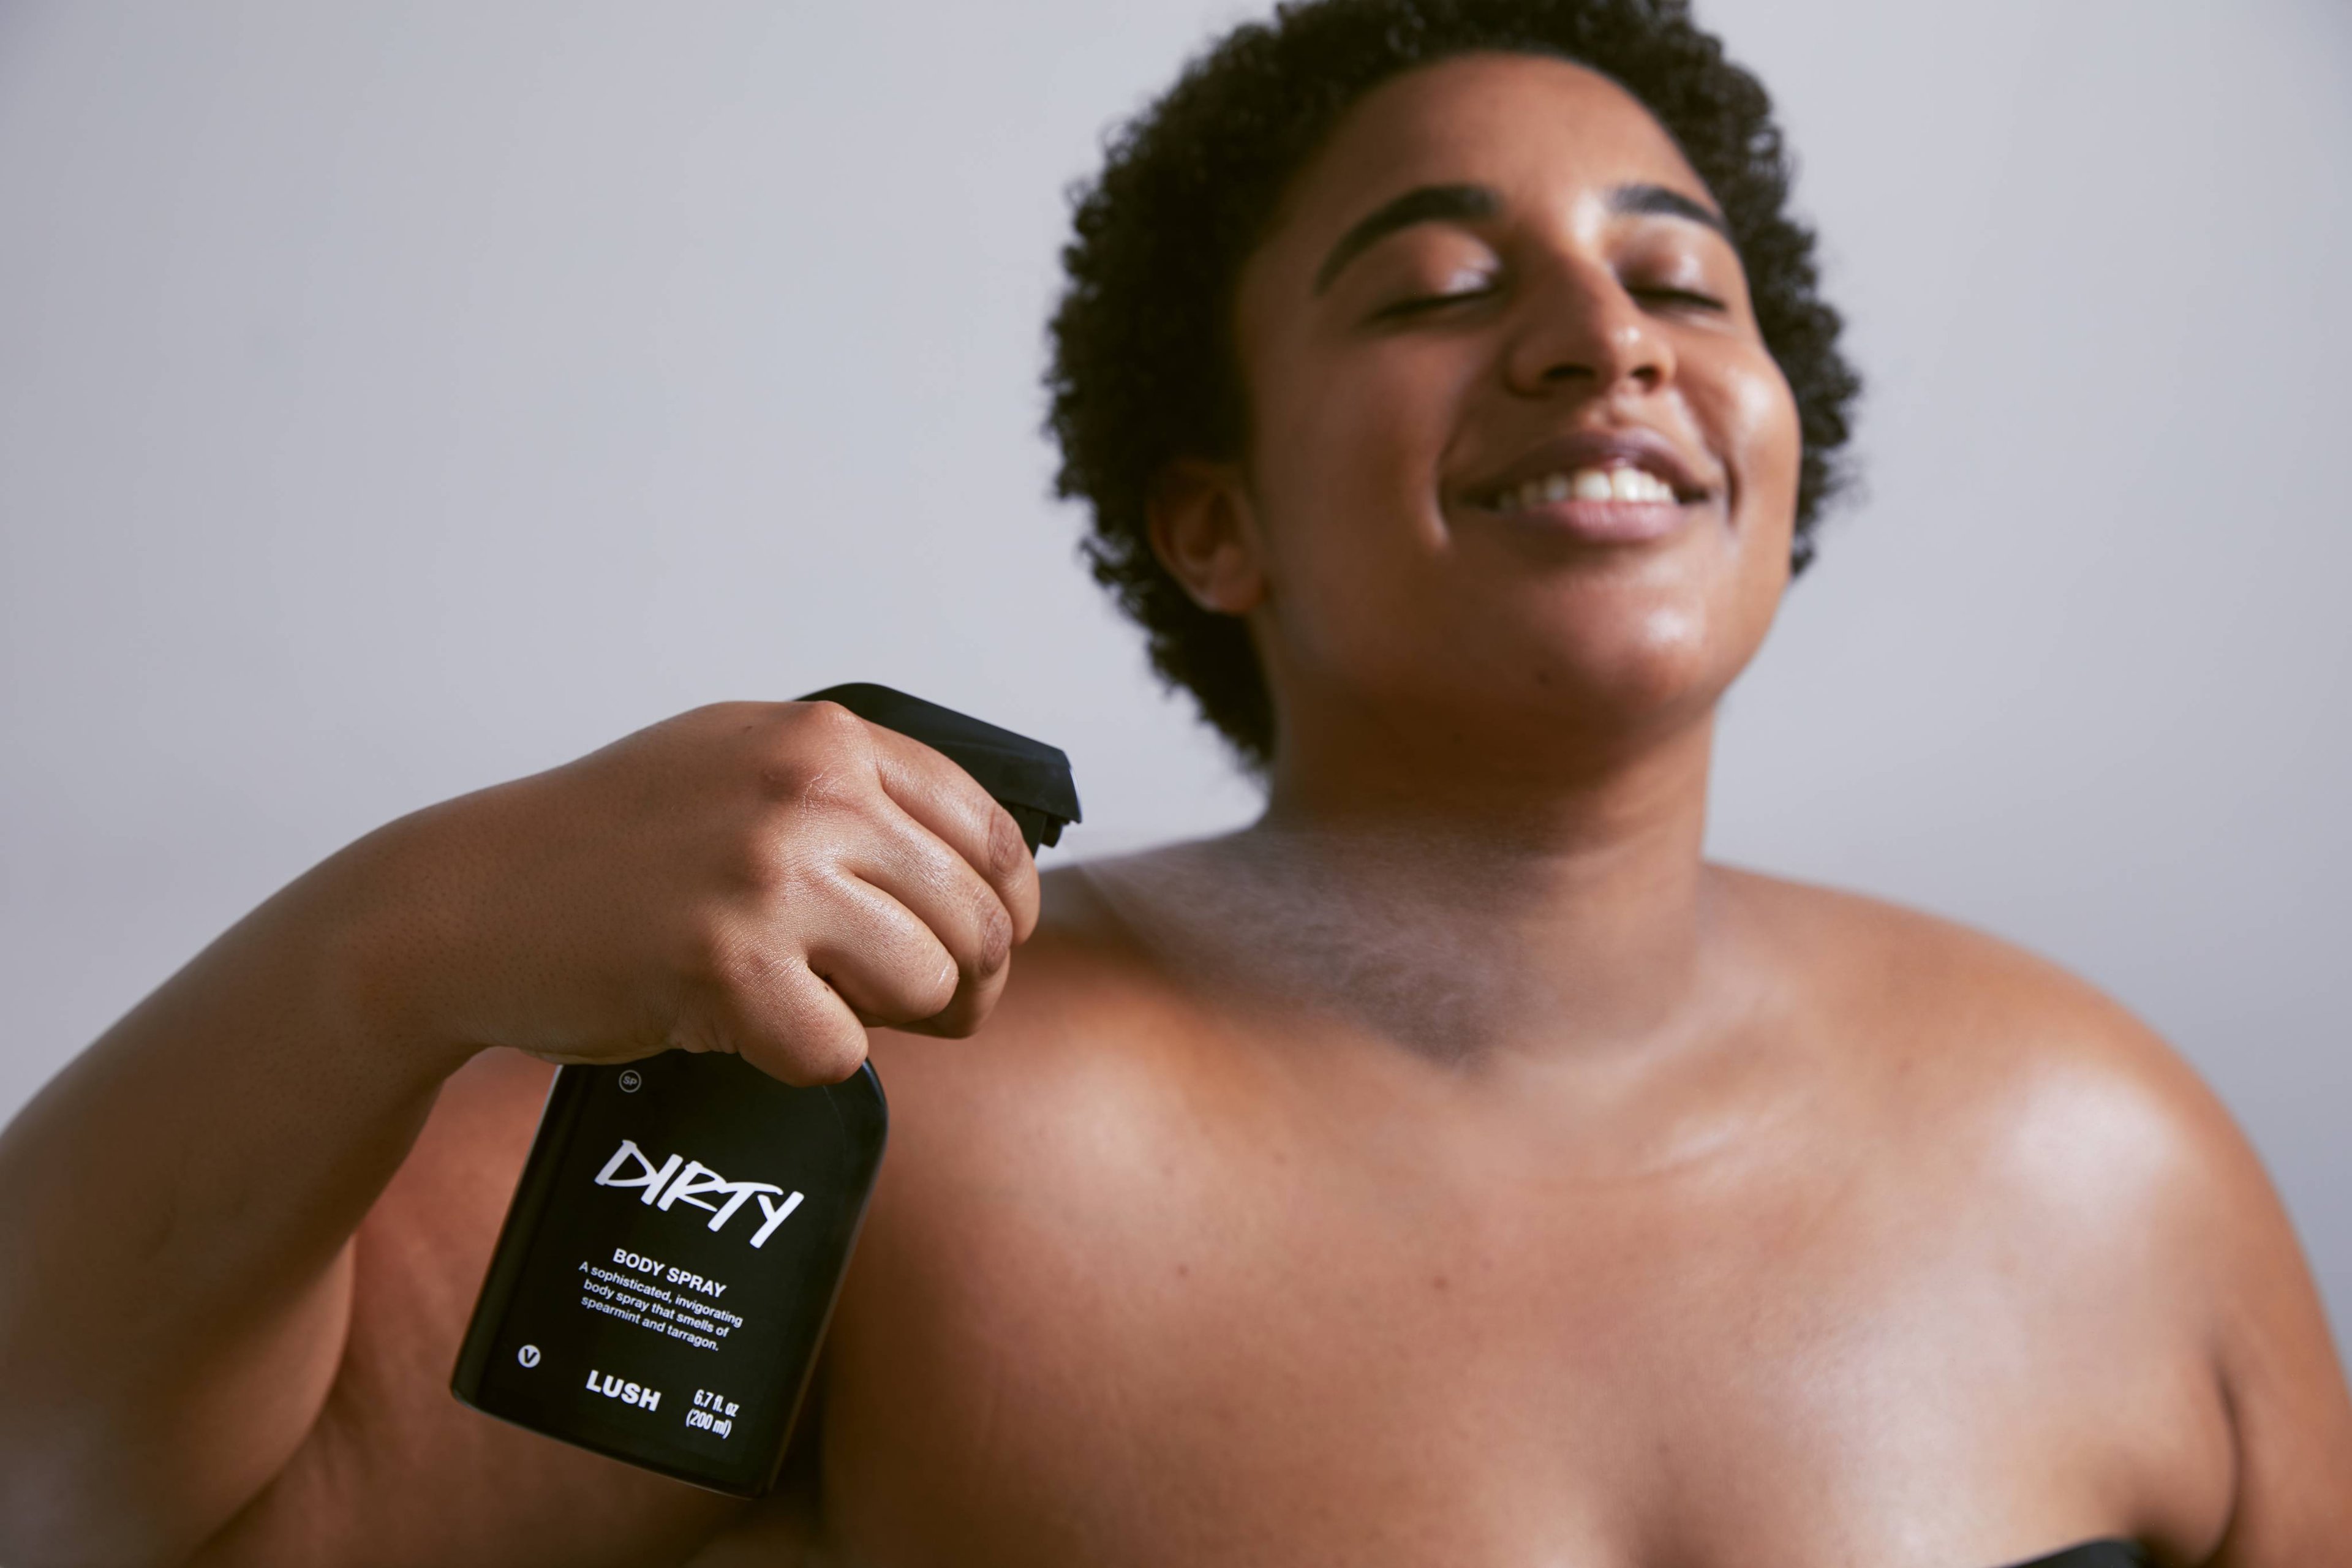 Dirty body spray is sprayed up into the air, in front of shirtless model who's smiling.